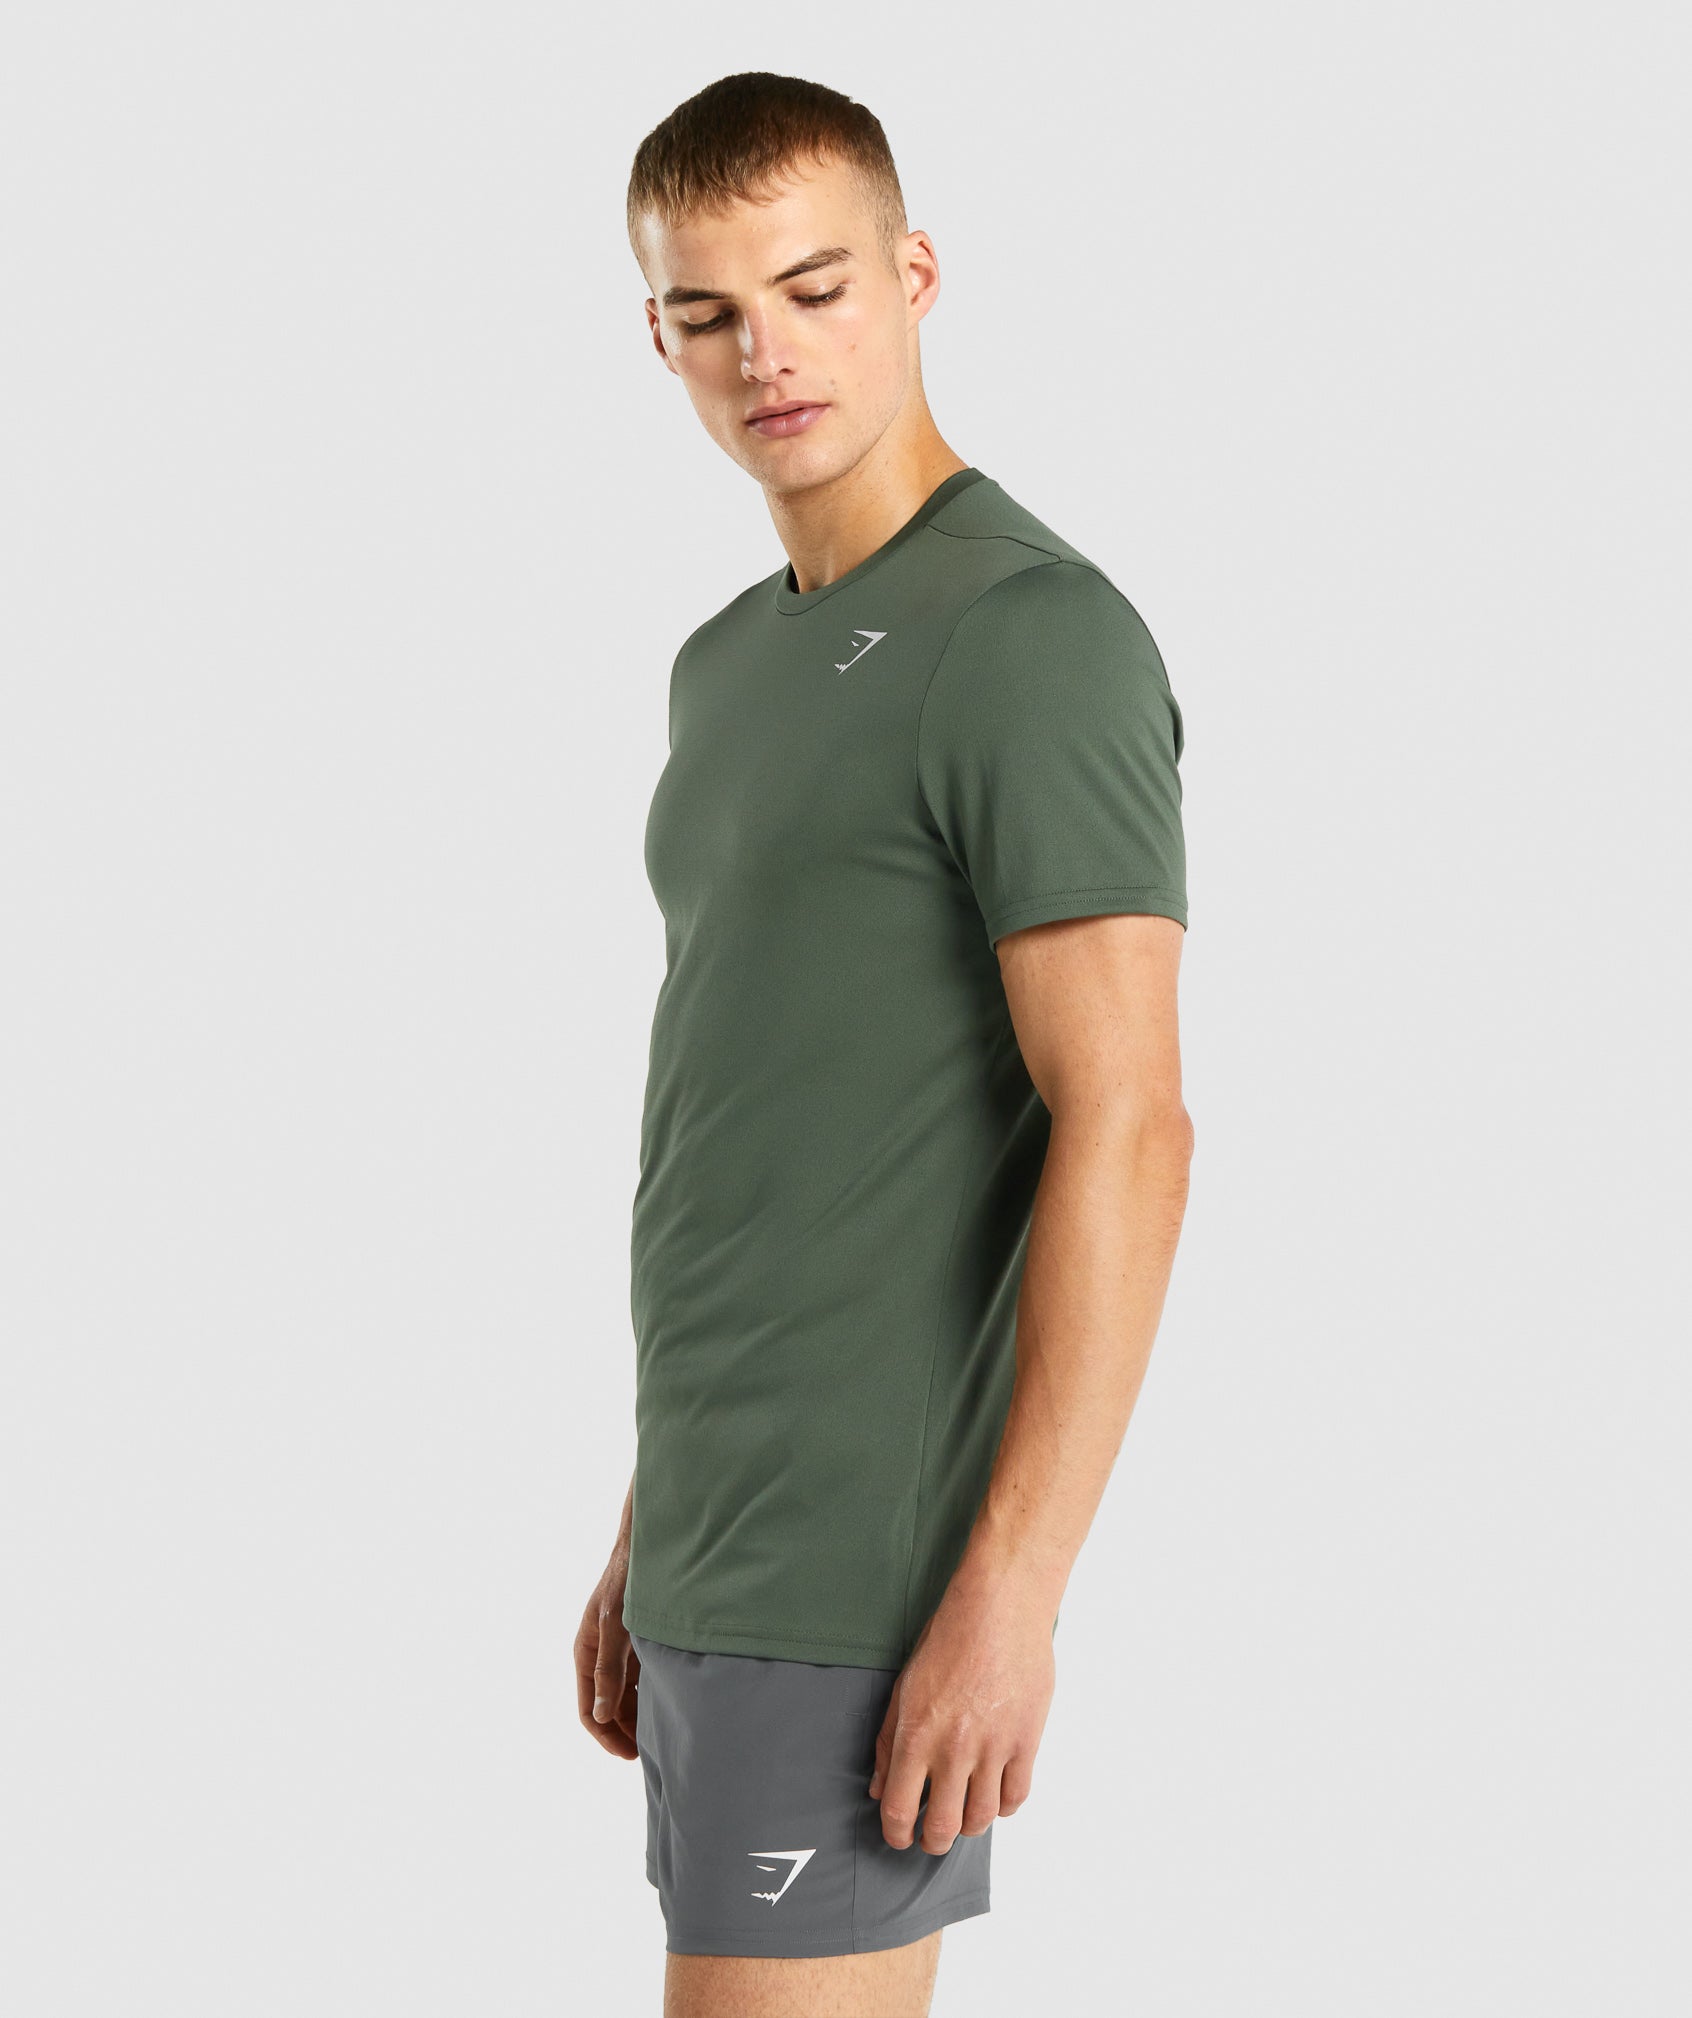 Arrival T-Shirt in Green - view 3